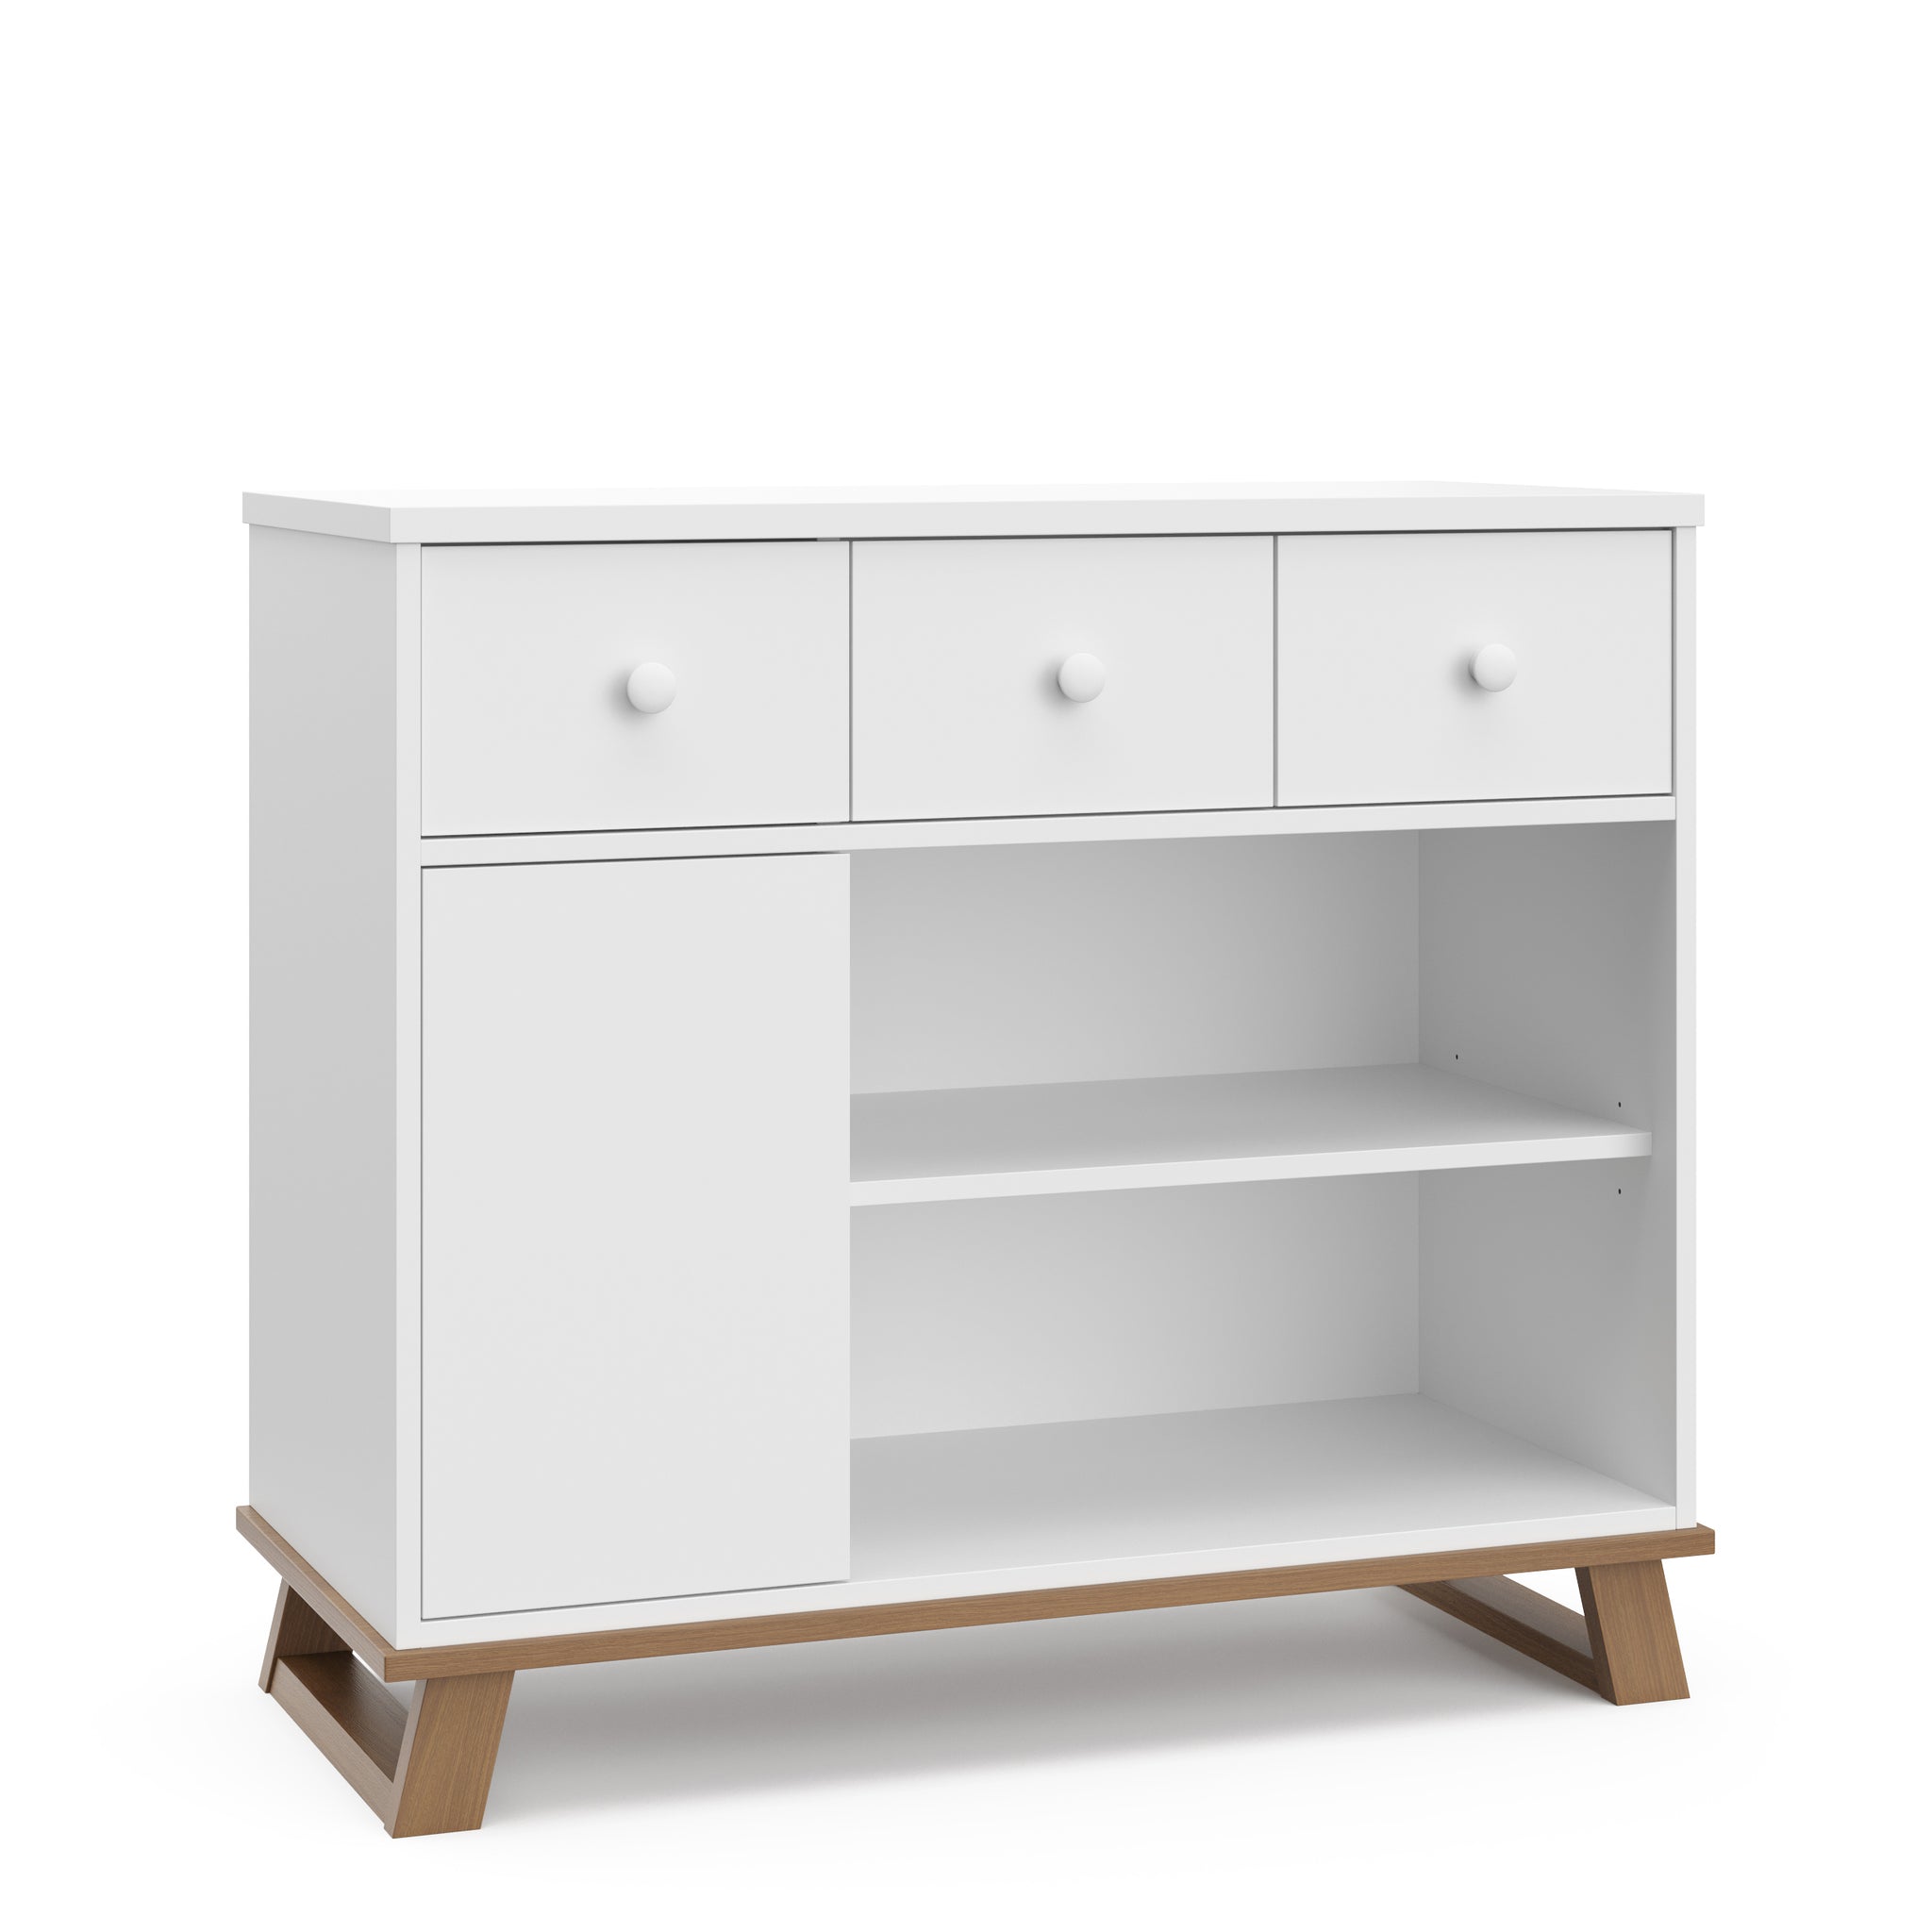 Front view of a changing table in white with a vintage driftwood base, showcasing two drawers and the changing topper removed for versatile use